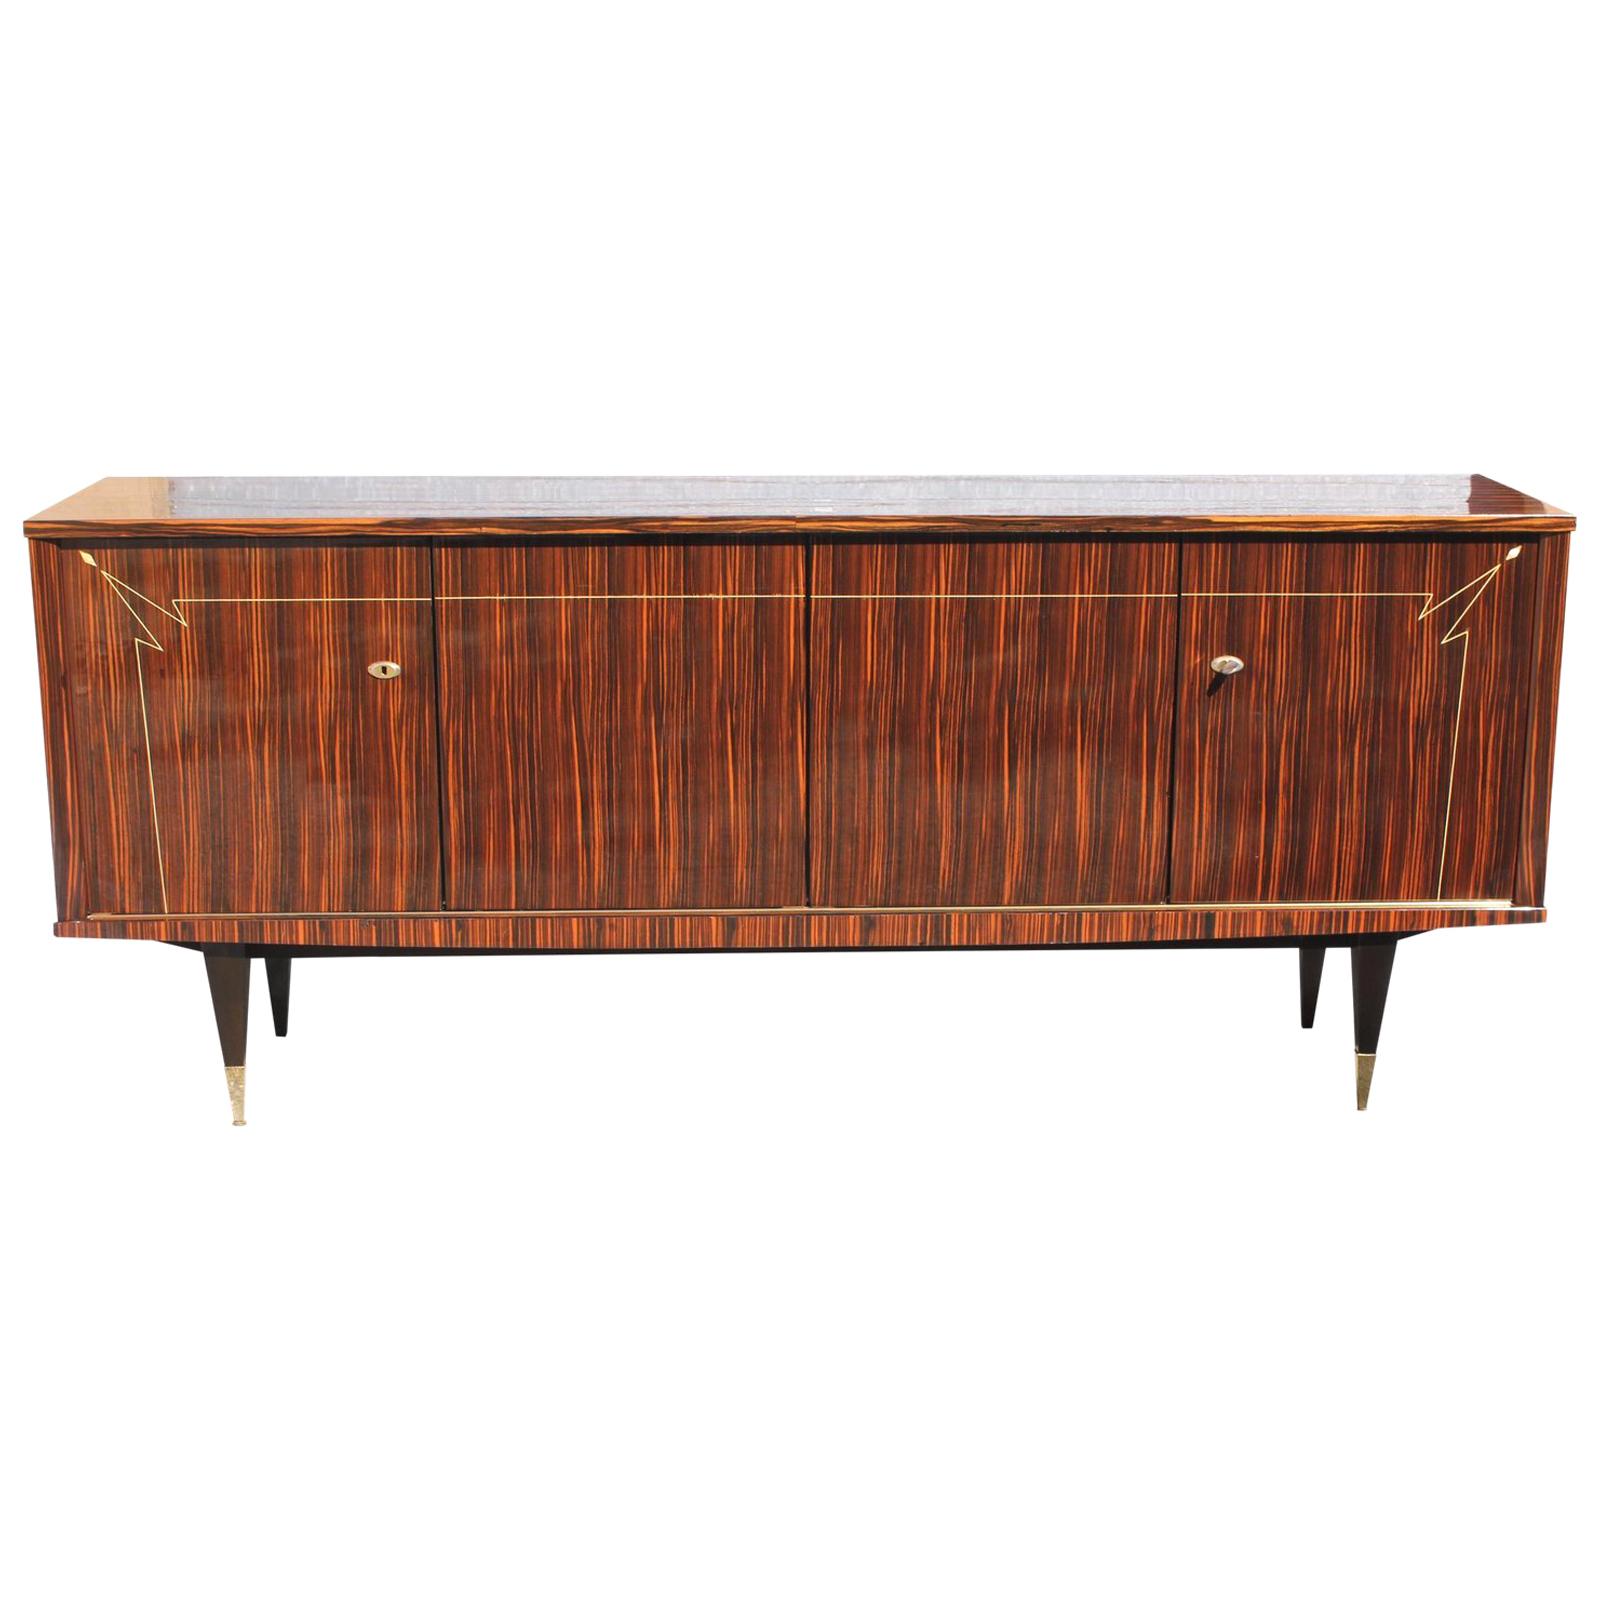 French Vintage Exotic Macassar Ebony Sideboard or Buffet, circa 1940s